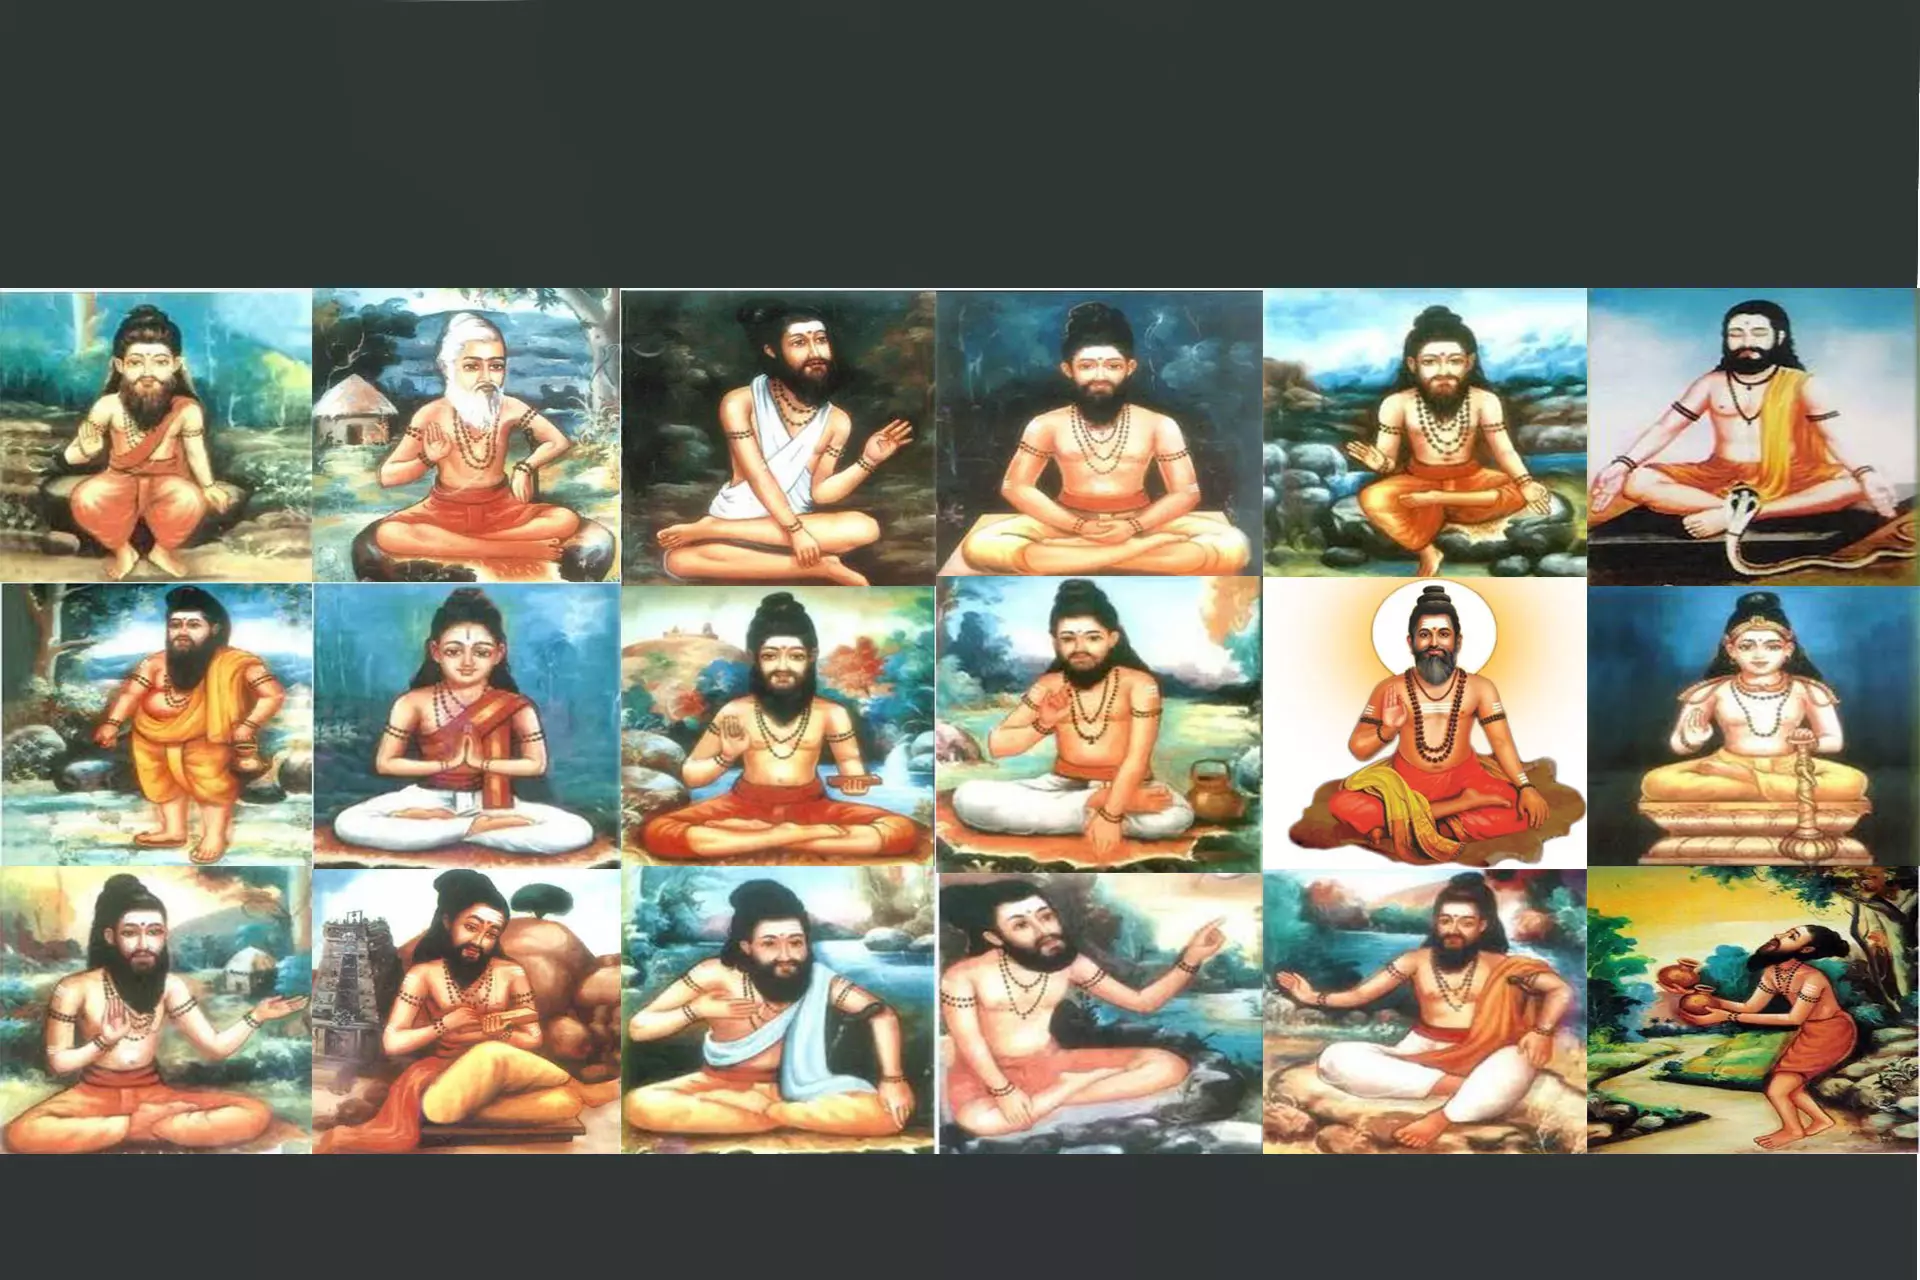 18 Siddhar Images